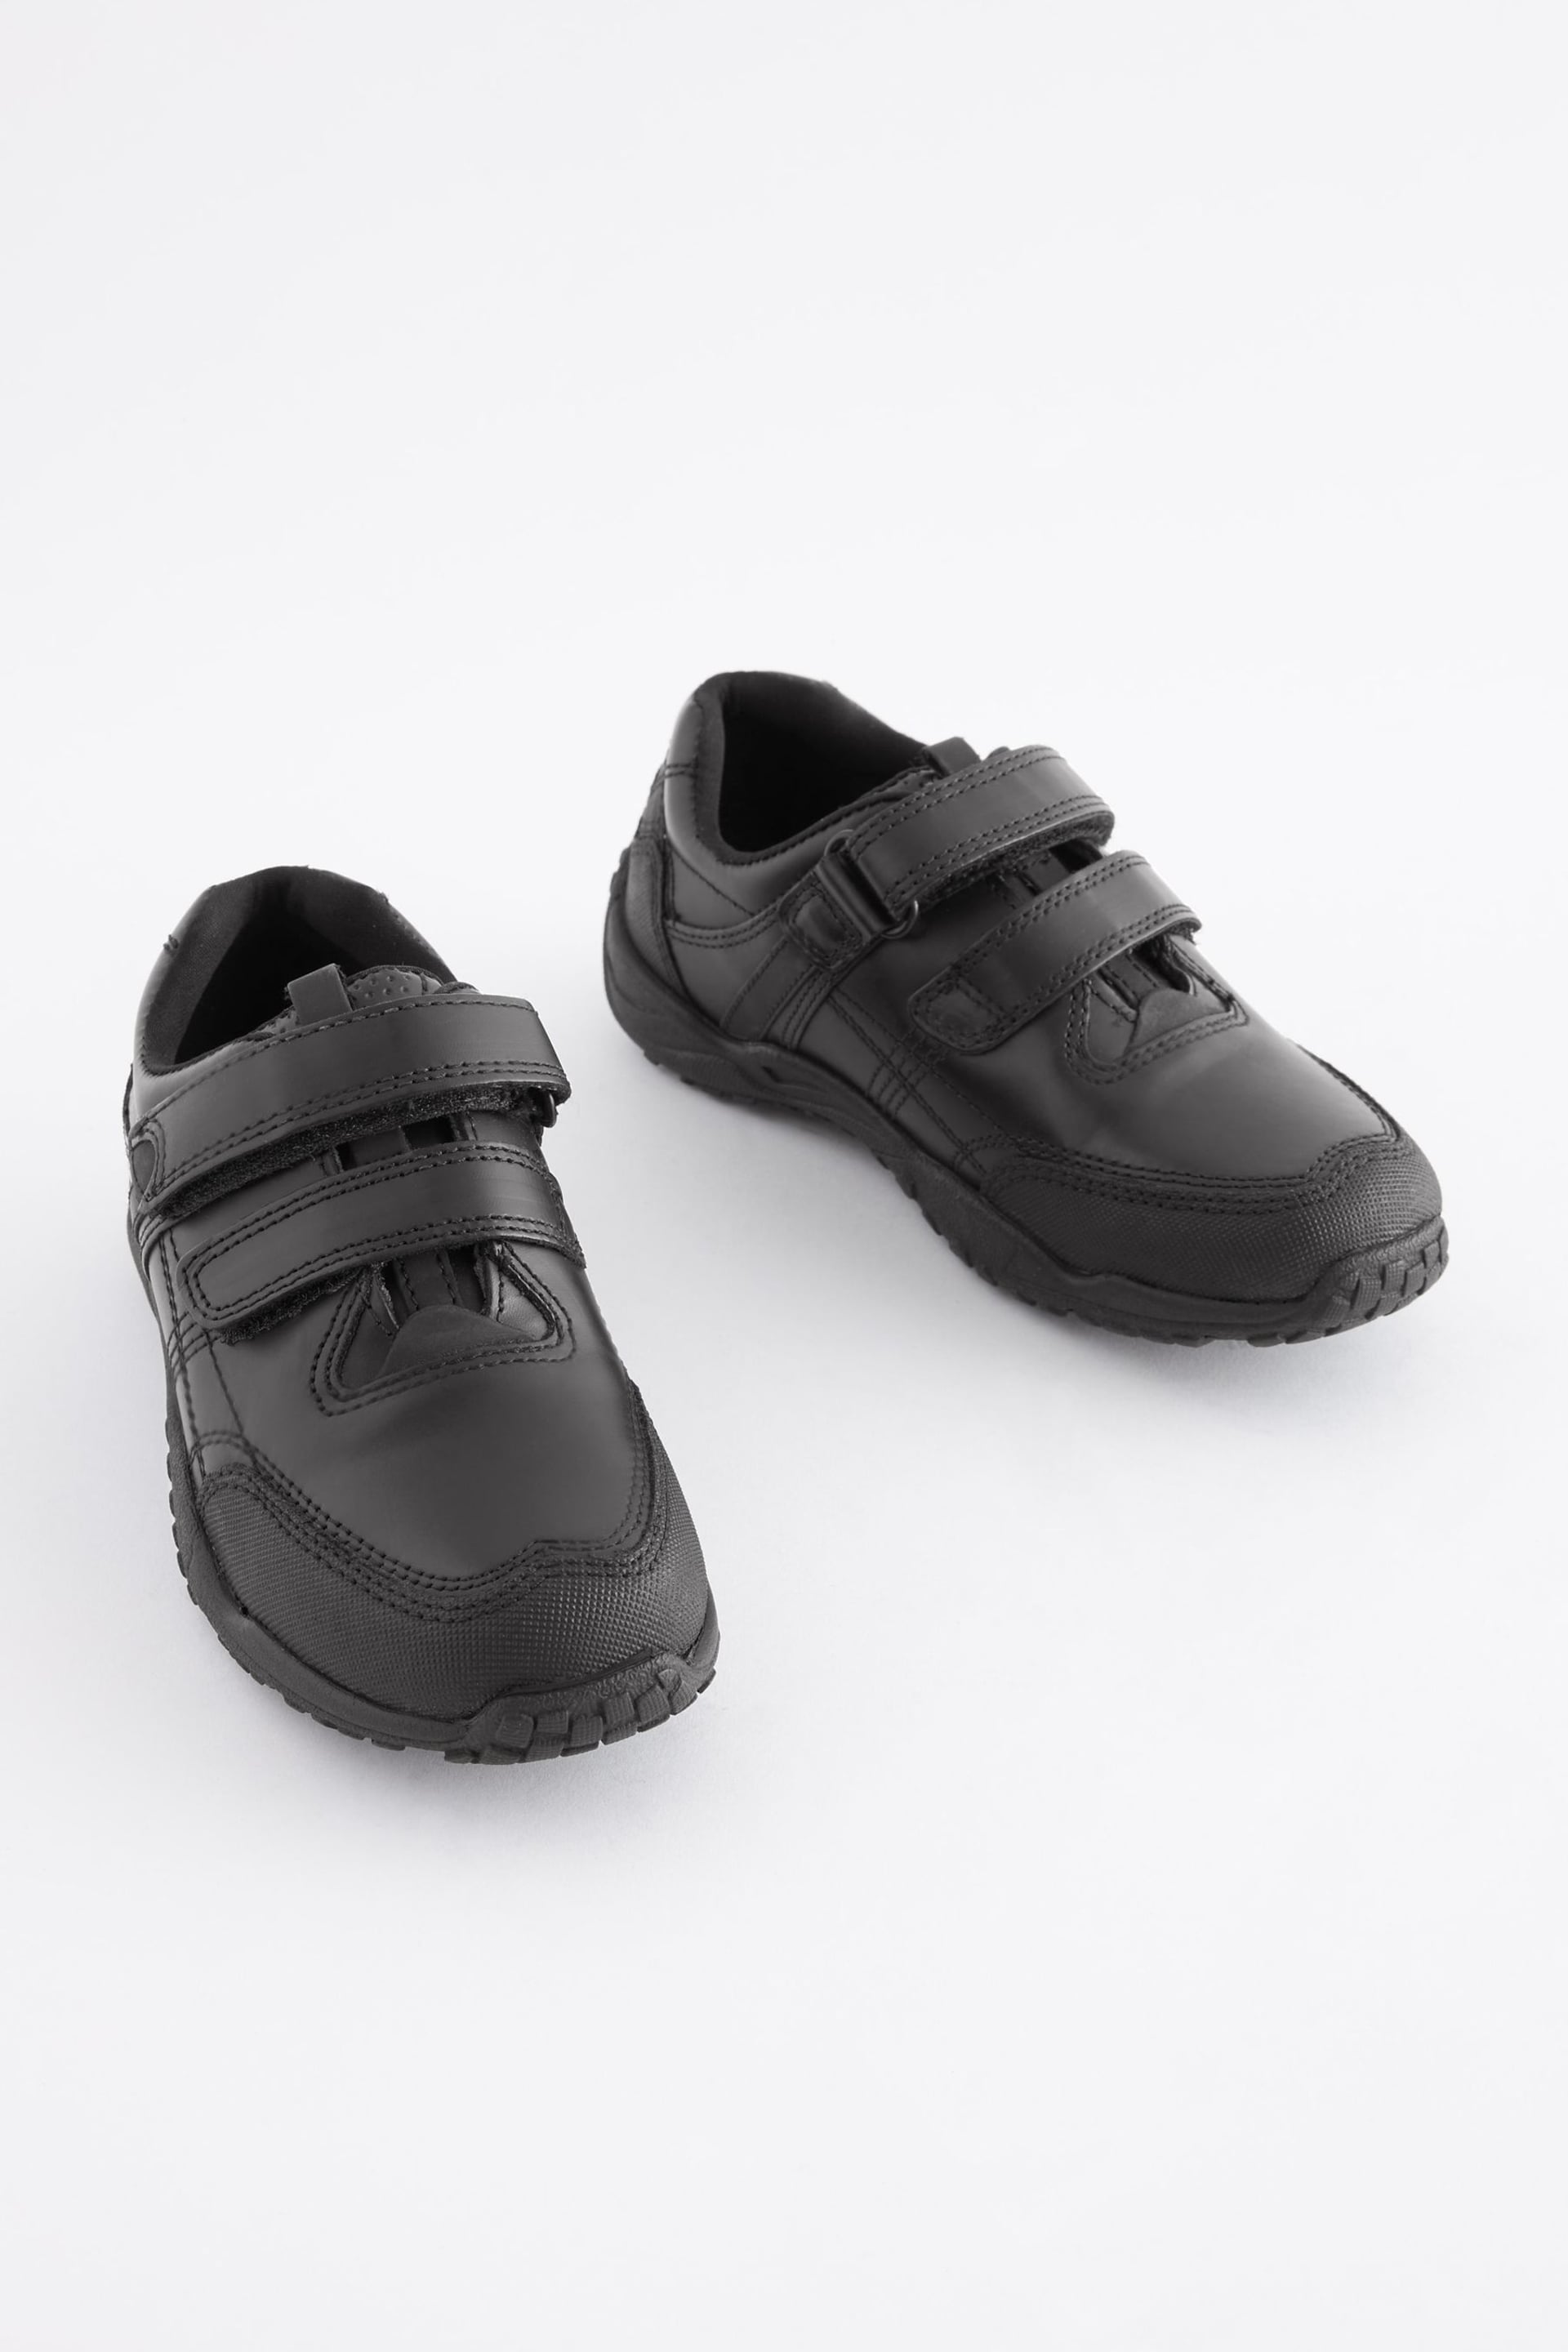 Black Standard Fit (F) School Leather Double Strap Shoes - Image 1 of 6